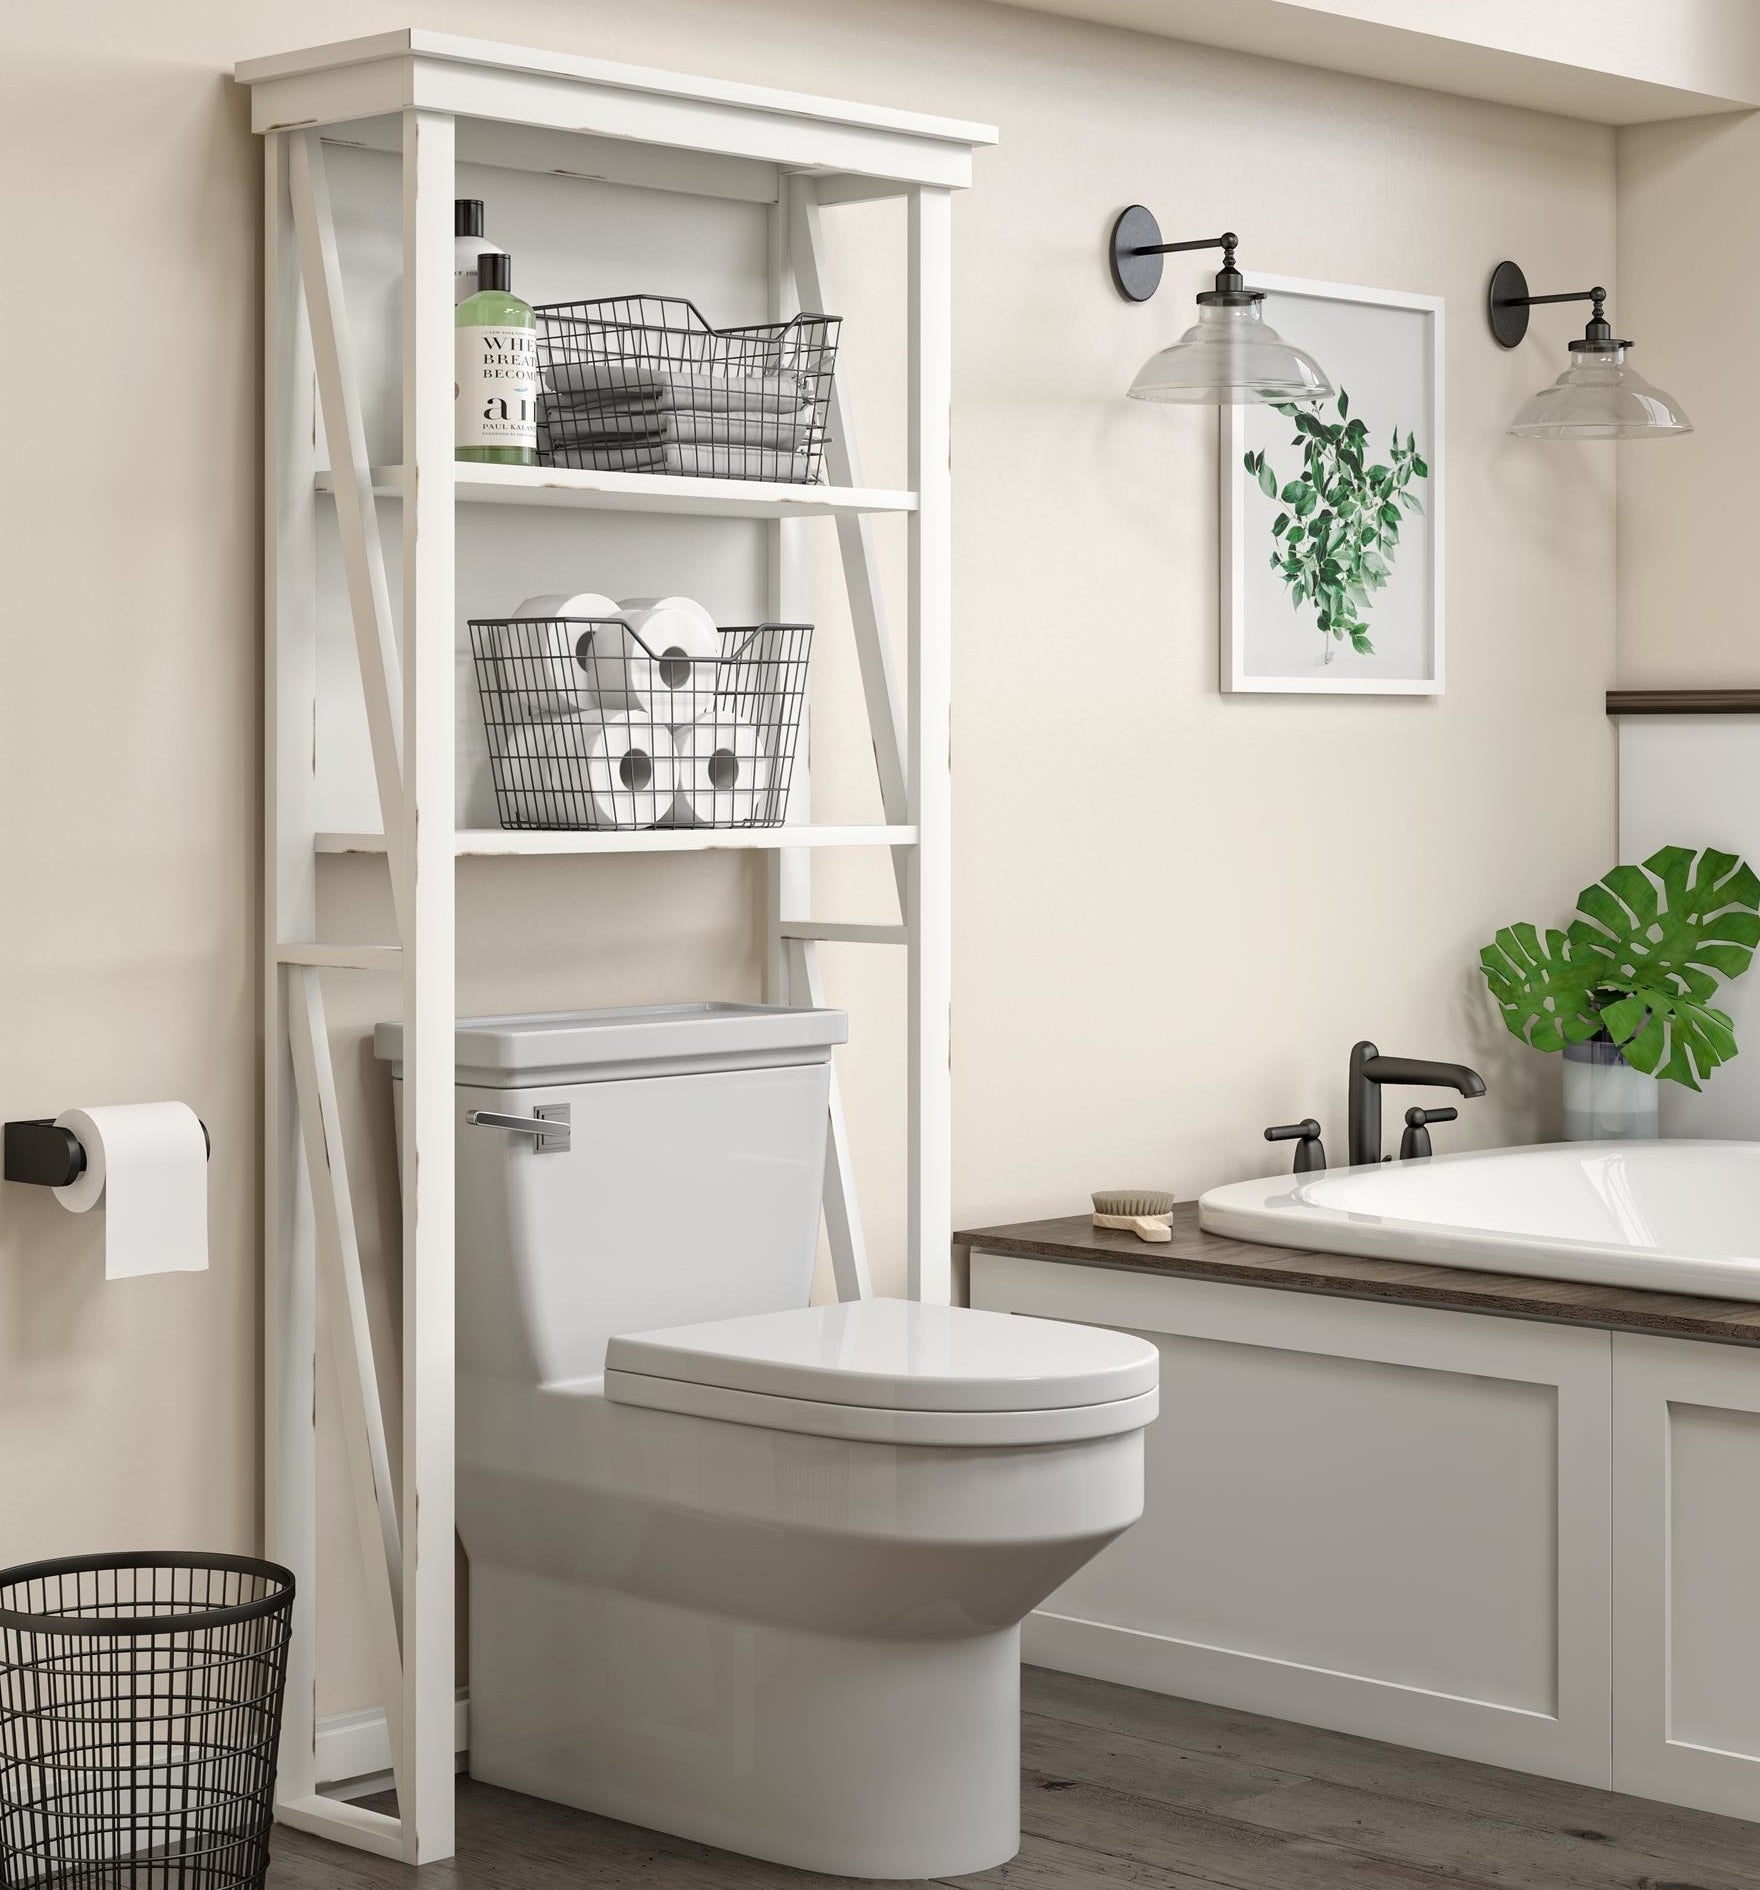 The over-the-toilet open storage cabinet with two shelves